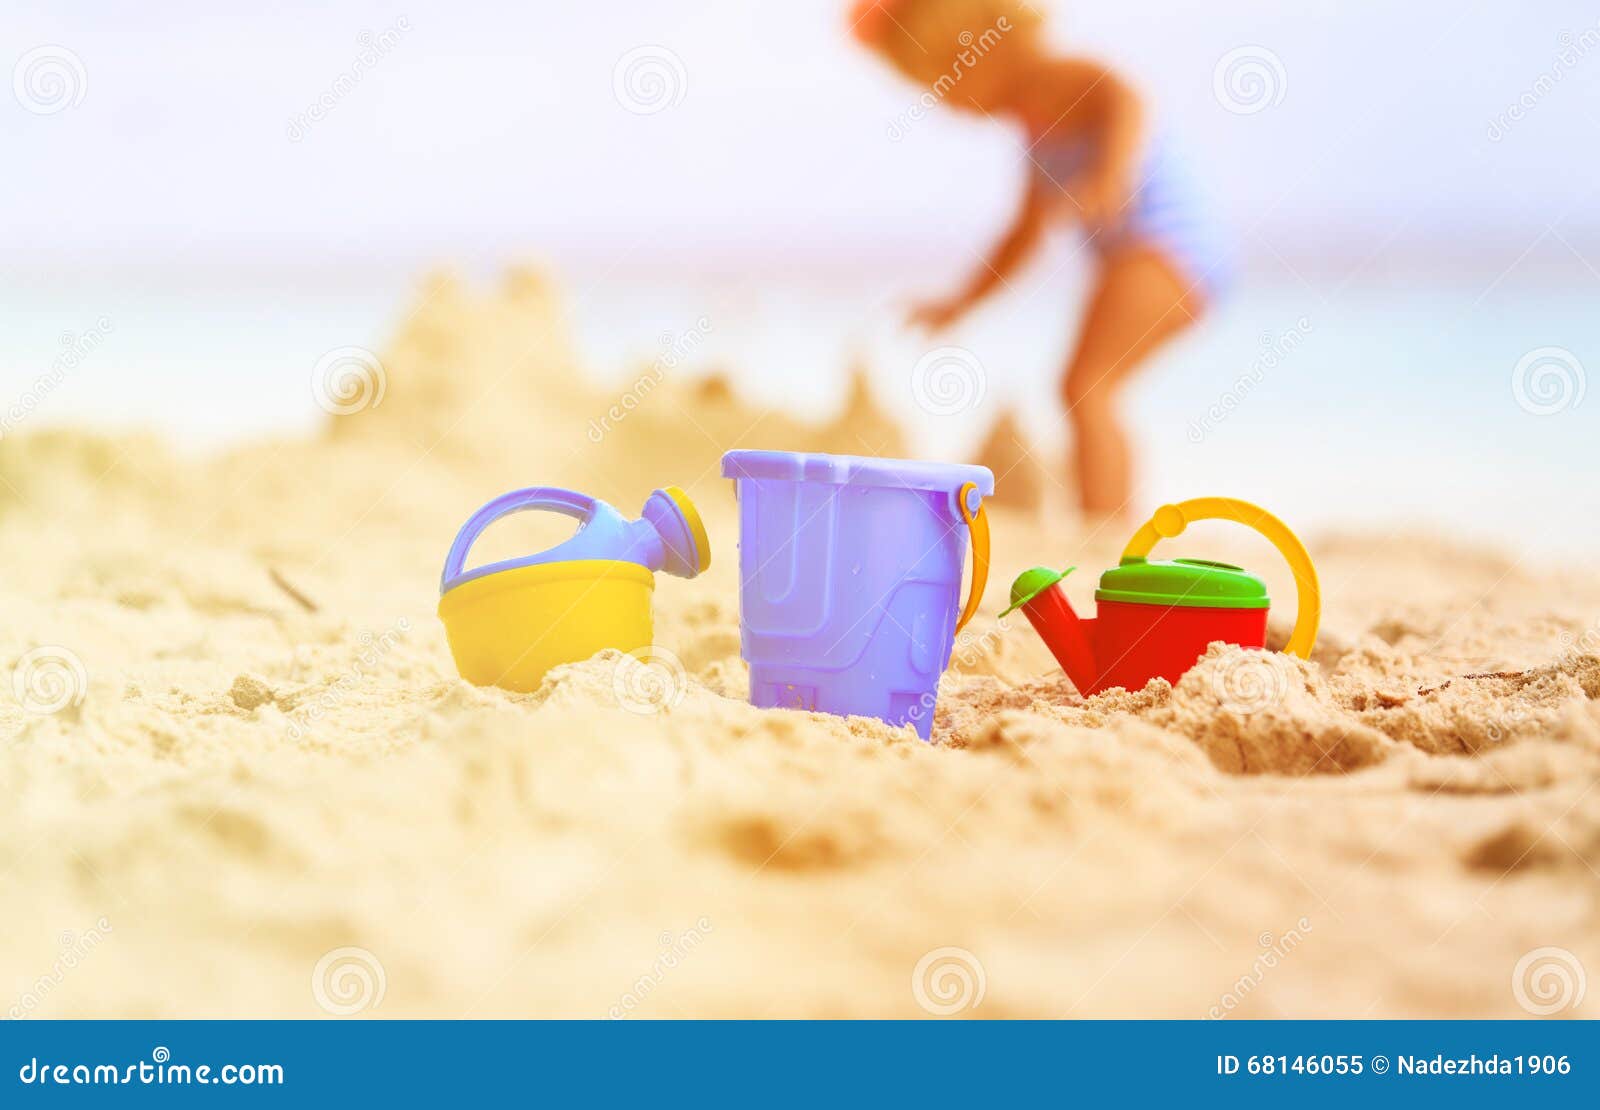 Kids Toys and Little Girl Building Sandcastle Stock Image - Image of ...